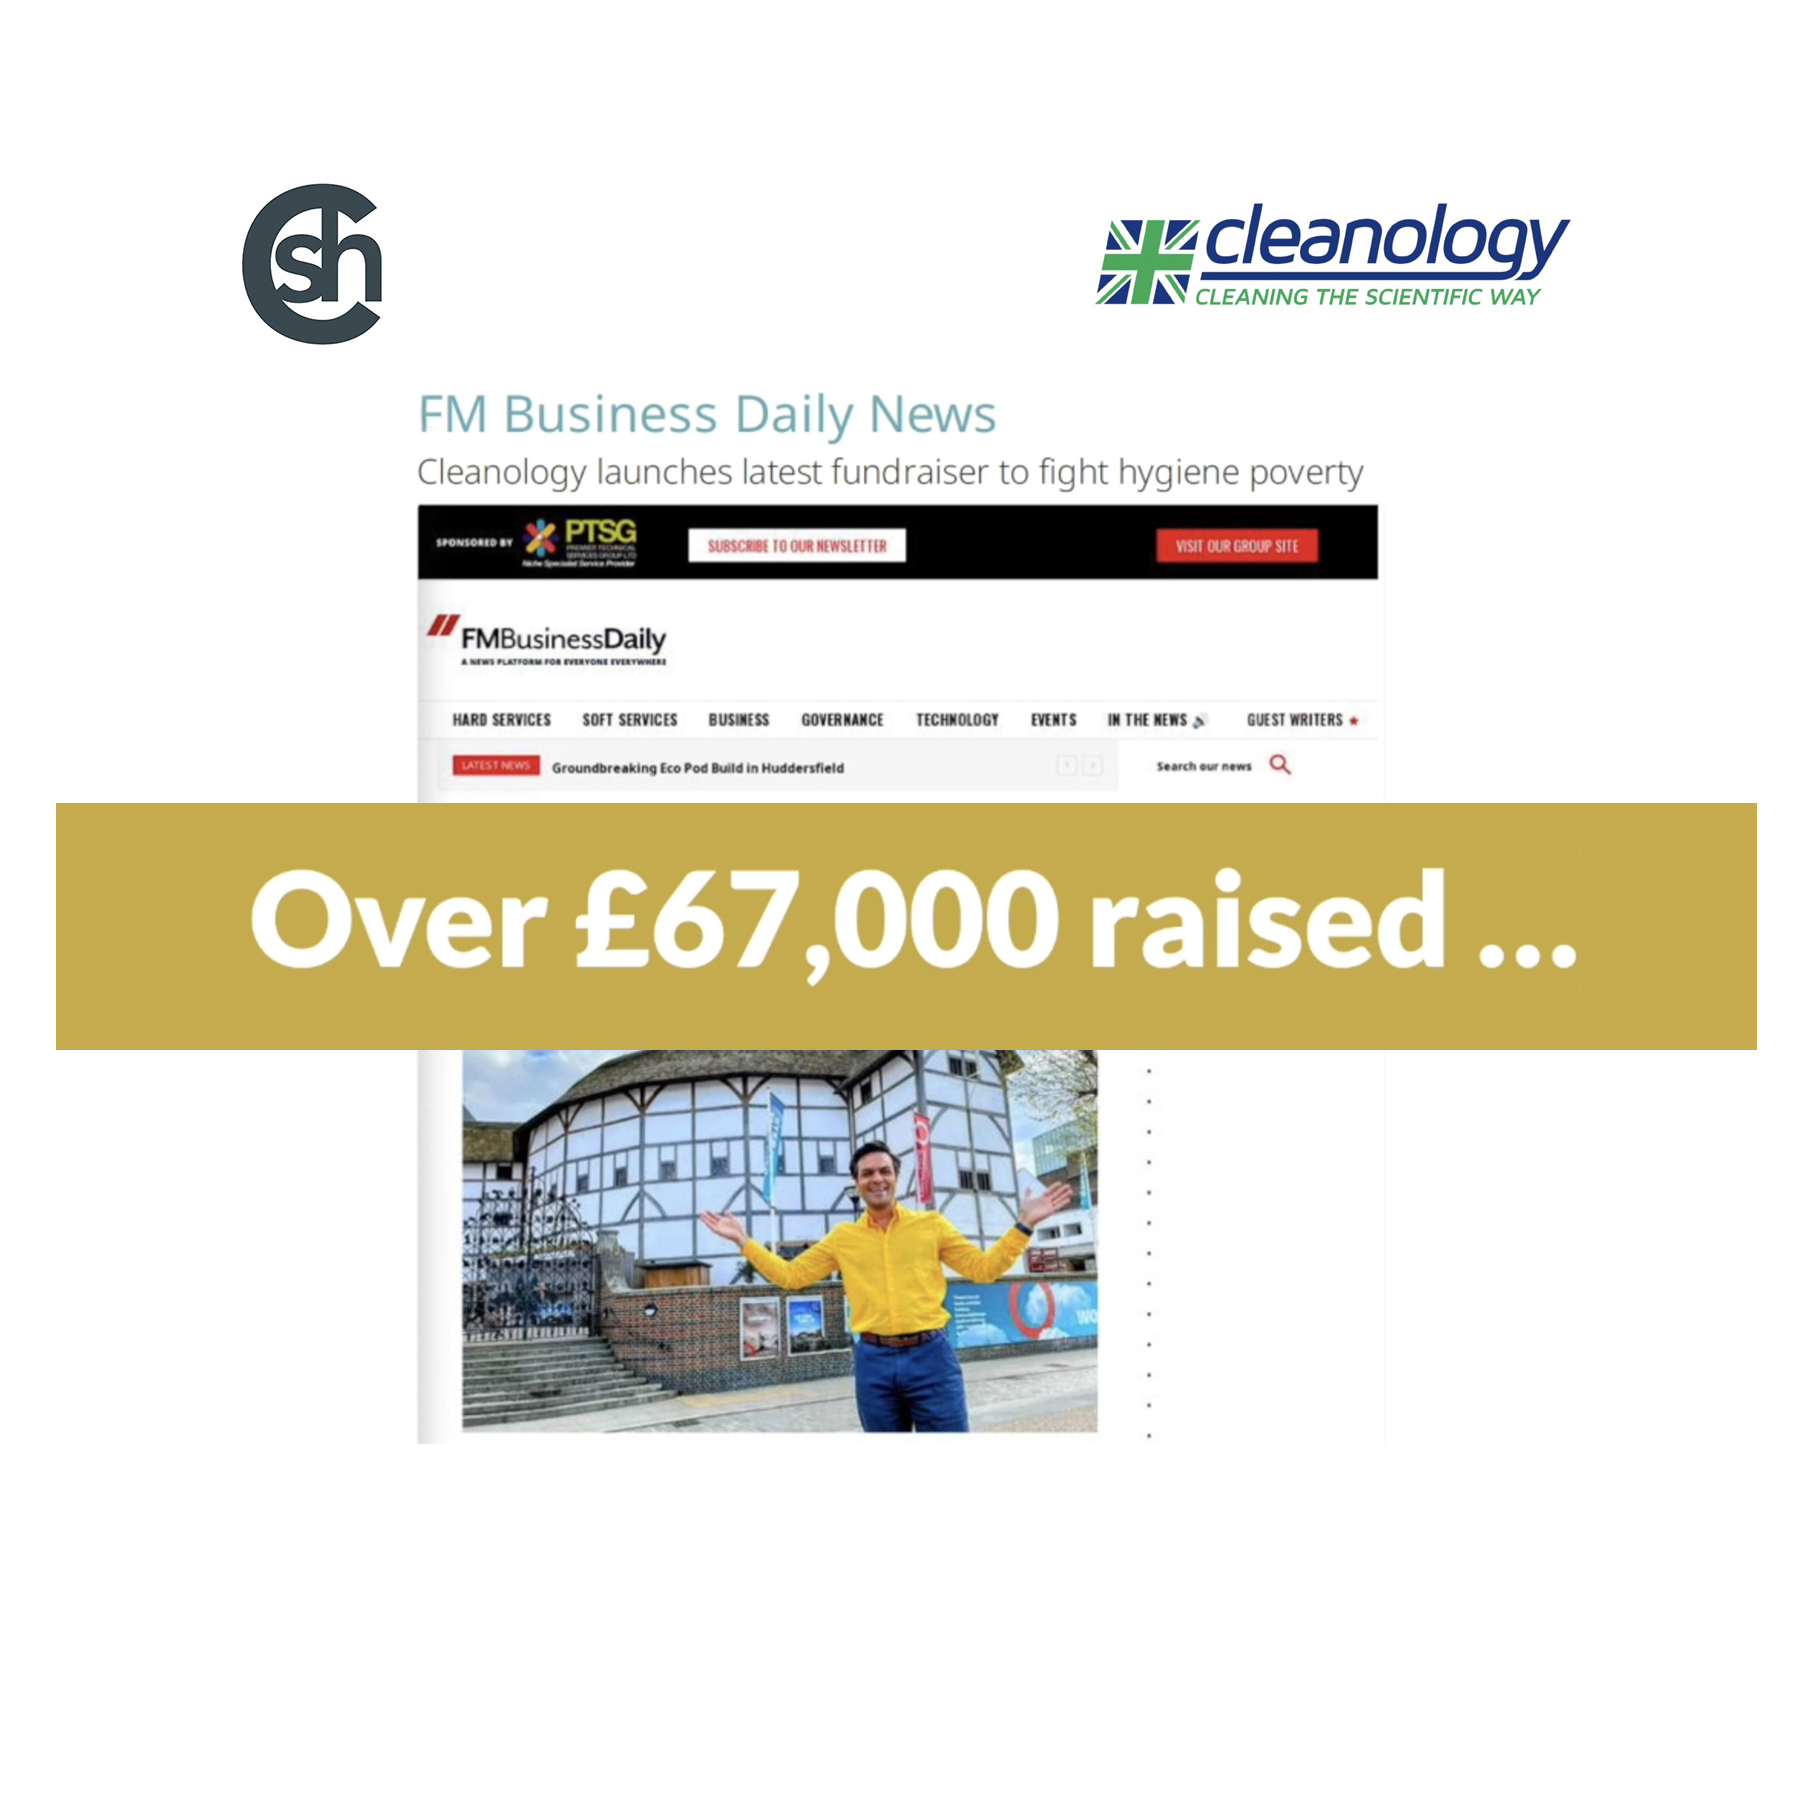 Celebrating Cleanology's fundraising success for The Hygiene Bank